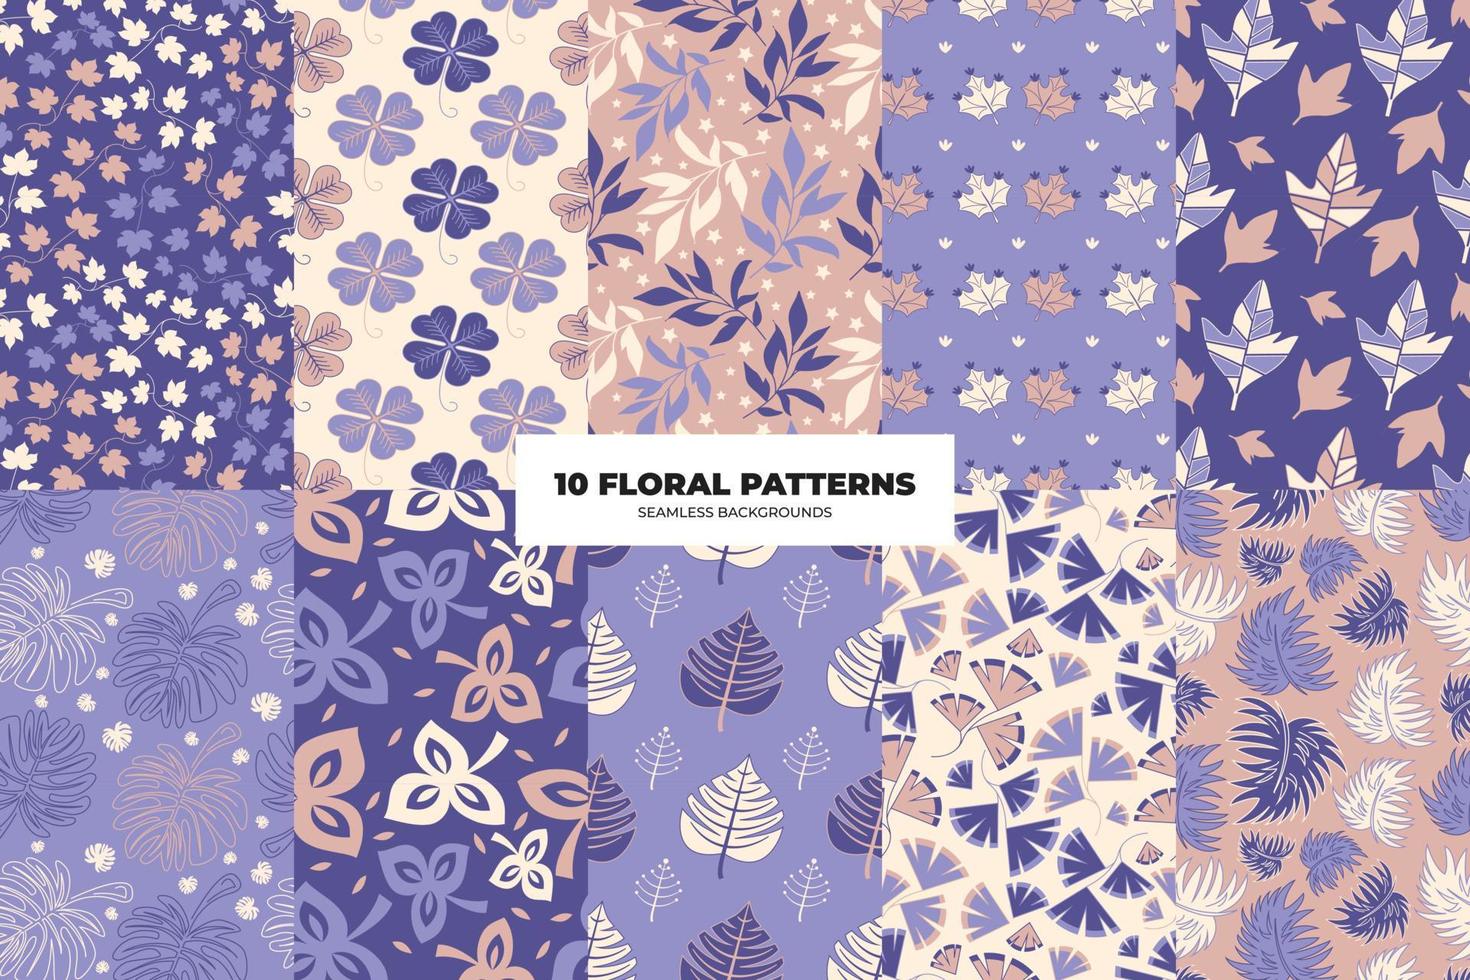 Floral seamless pattern set. Leaves and flowers in purple and lilac tones. Repeating vector backgrounds for paper, cover, fabric, interior decor and textile users. Vector illustration.